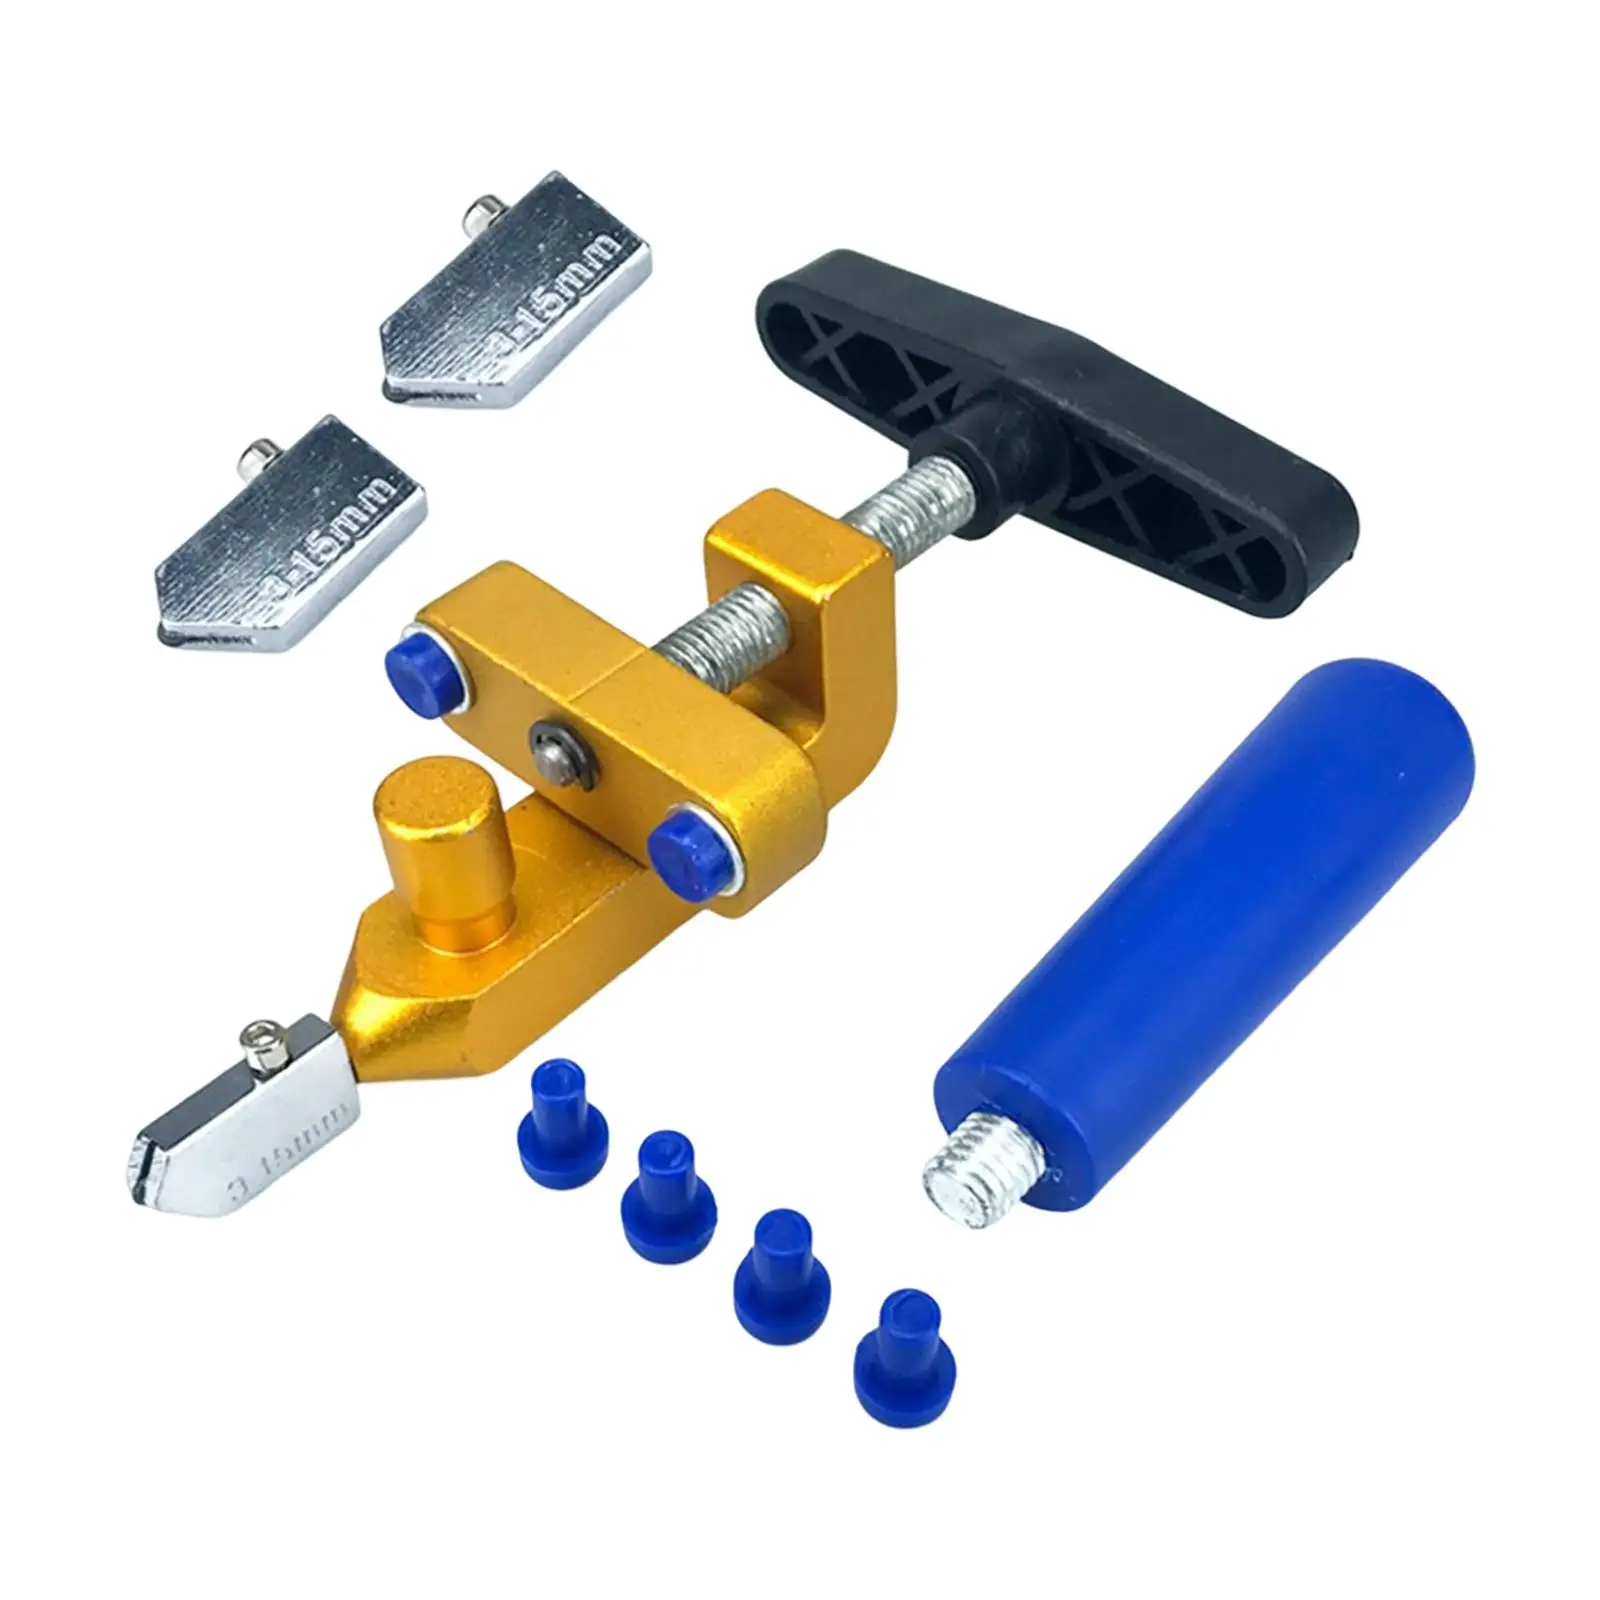 Multifunctional Ceramic Tile Opener Portable Hand Tools Lightweight ,Construction Tool Manual Glass Cutter for Home DIY